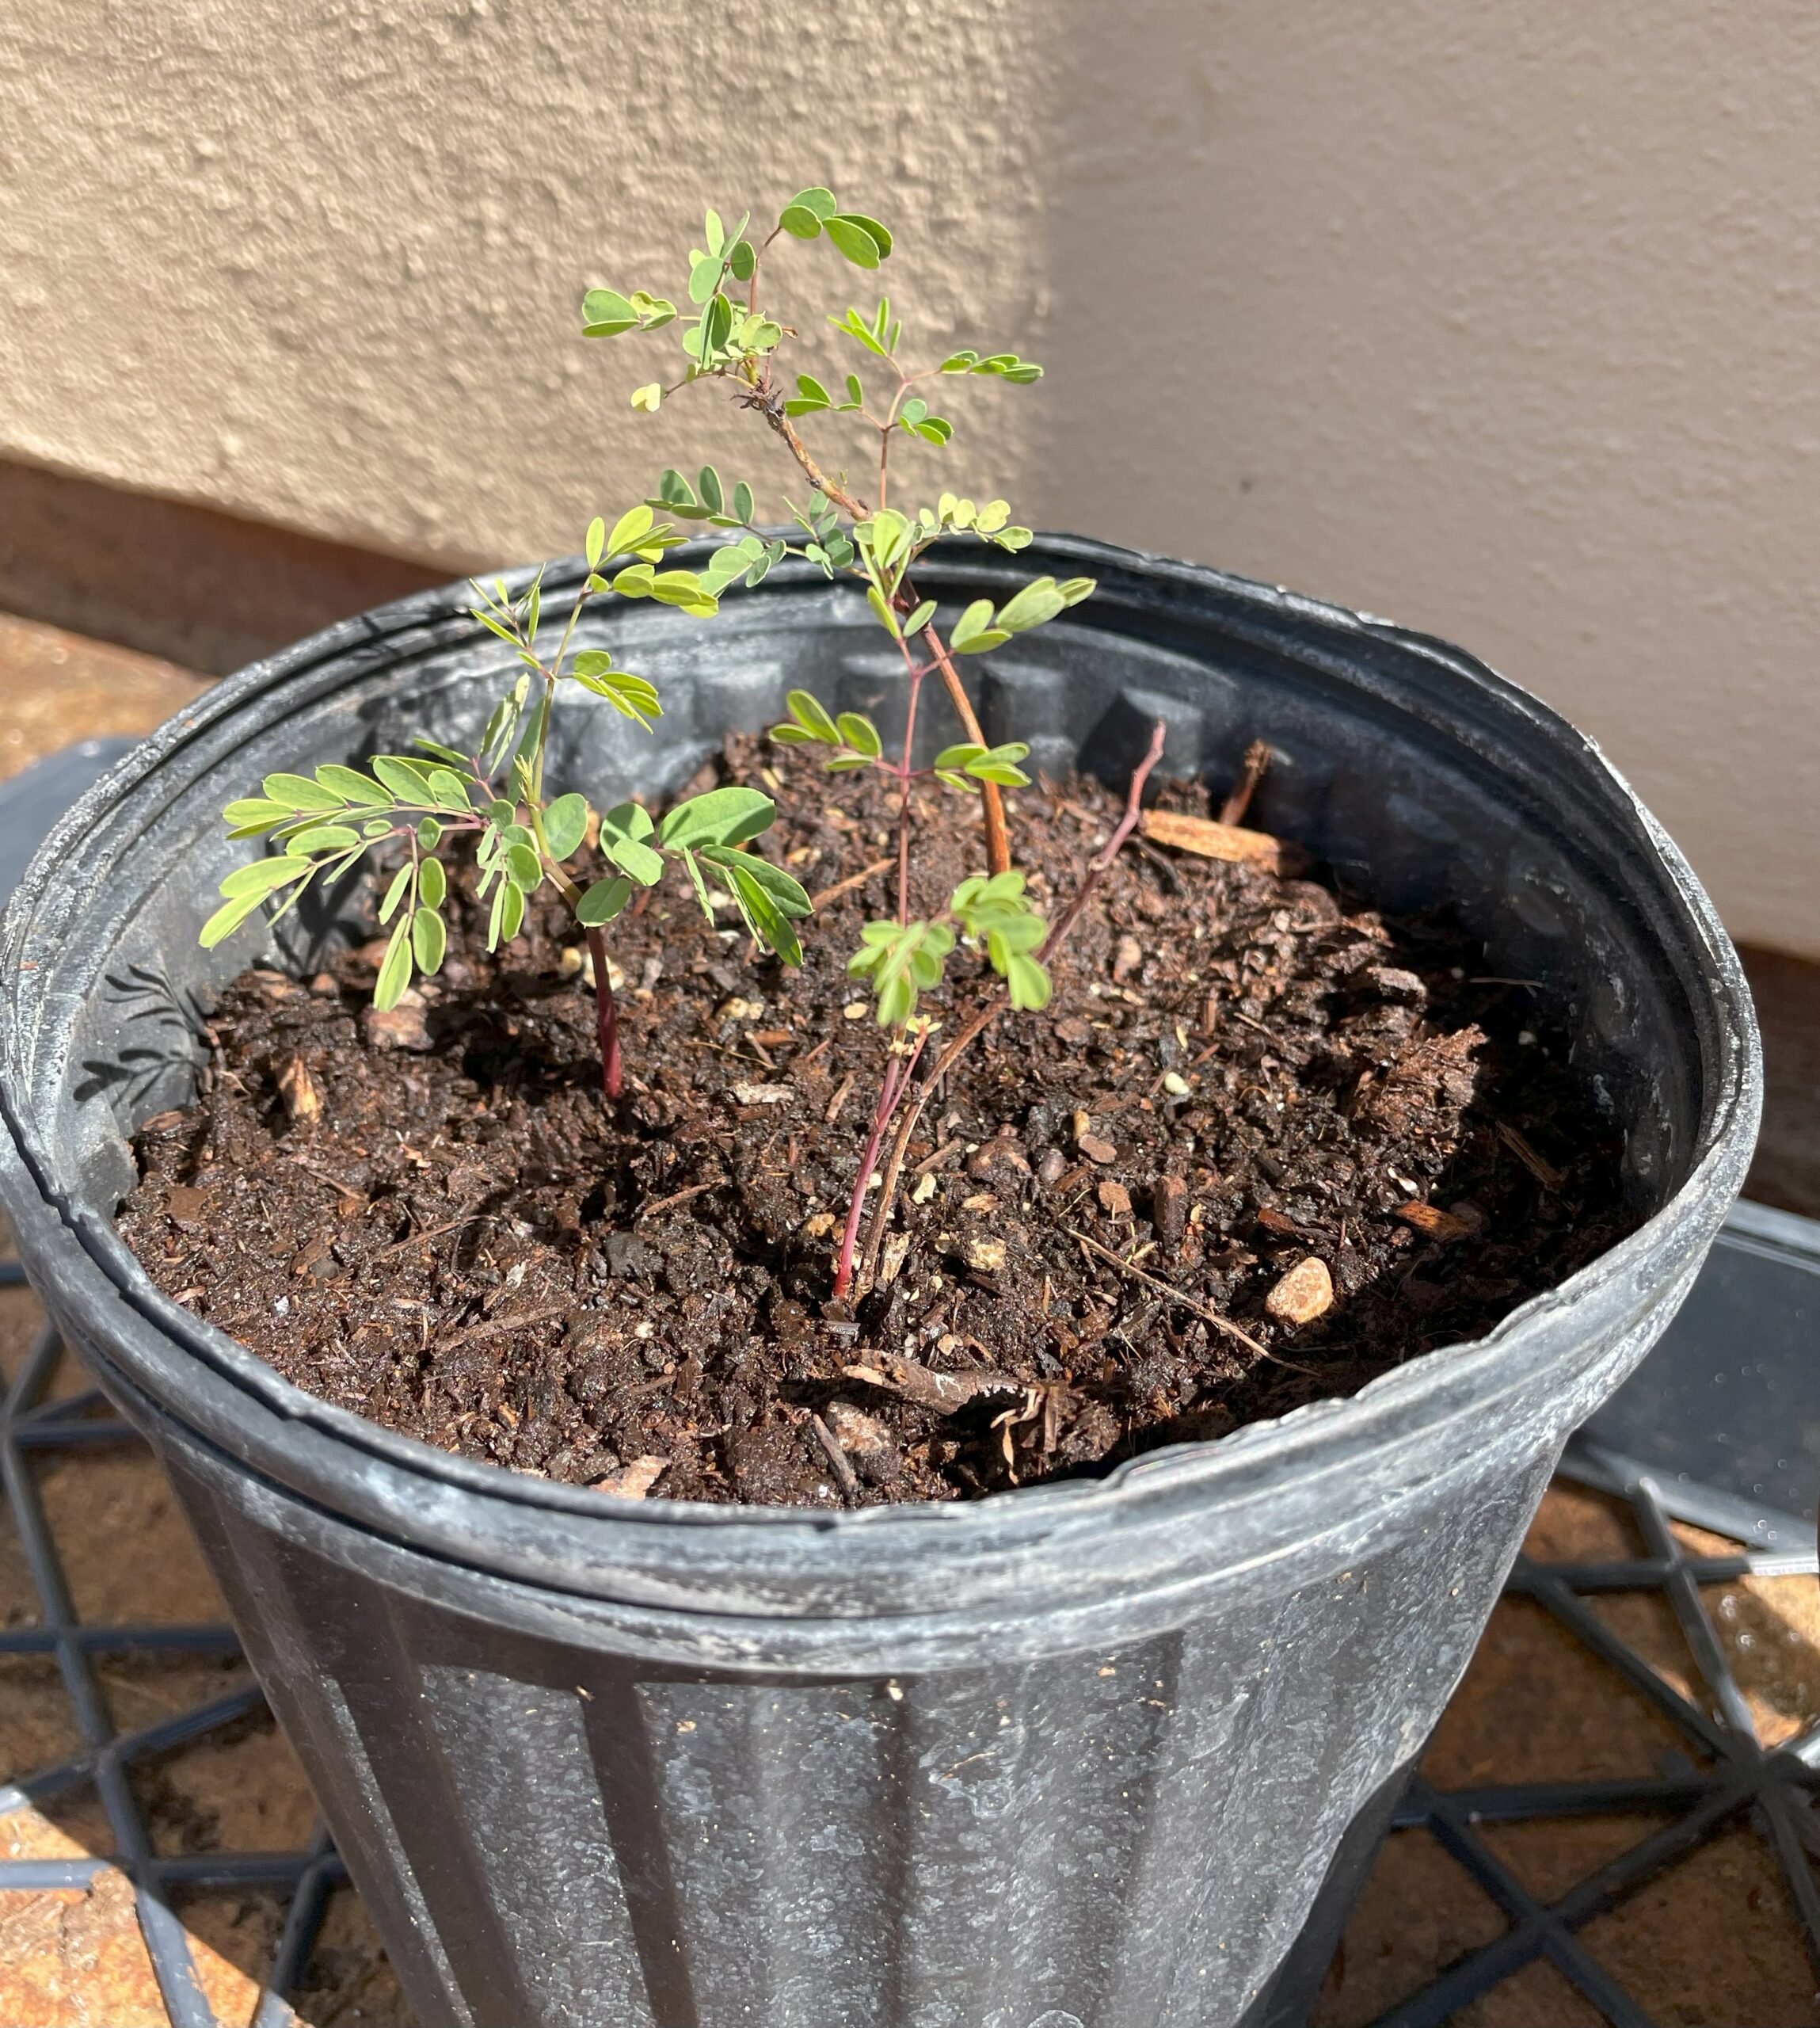 Small plant emerging from potting soil